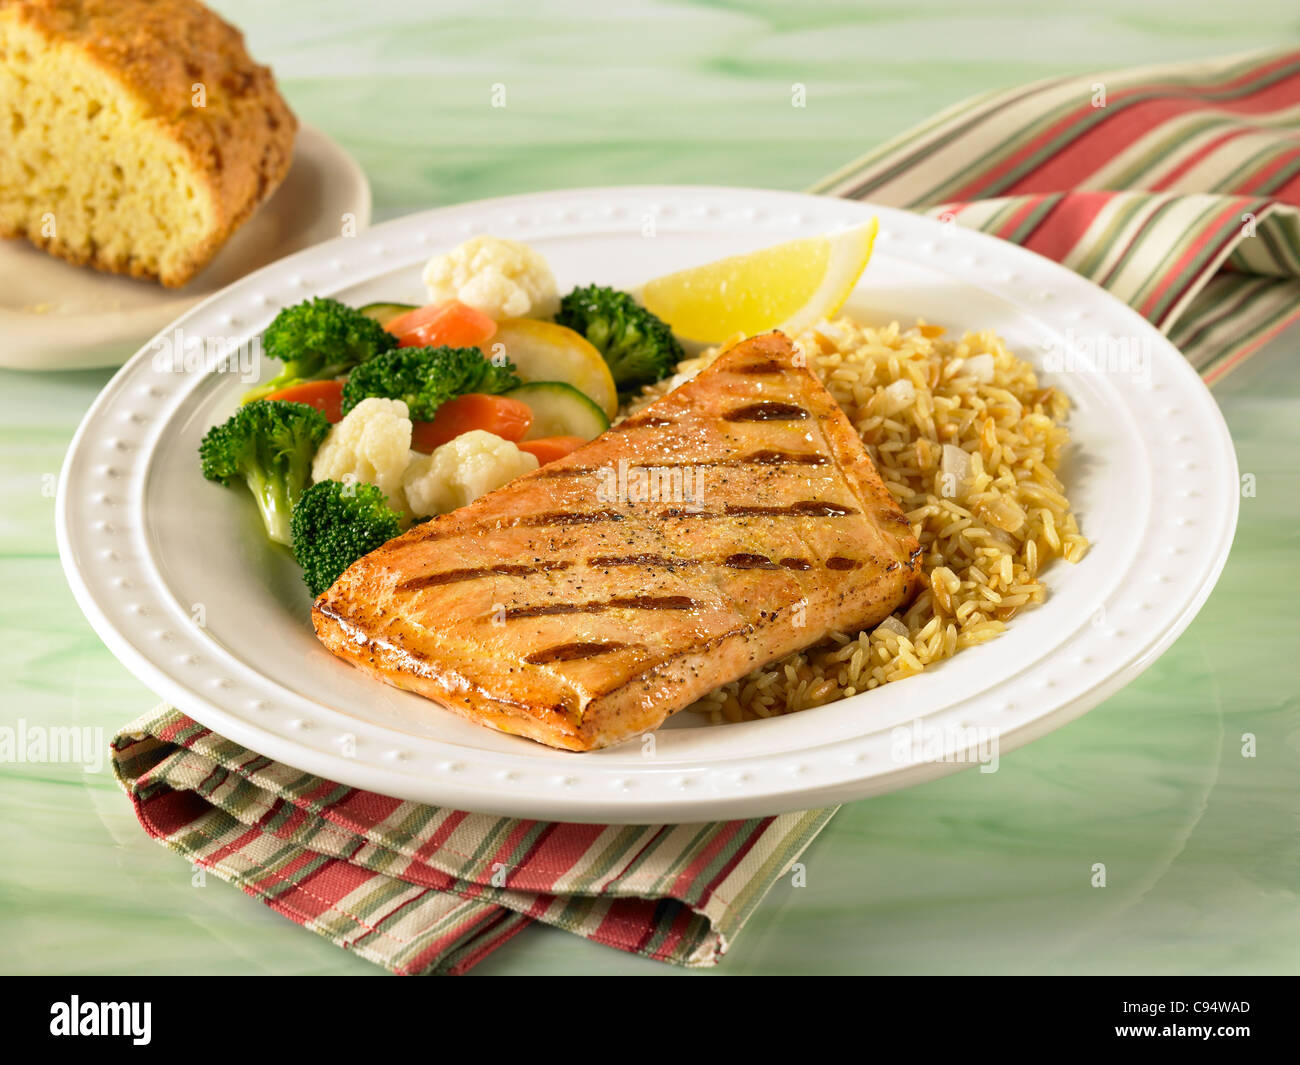 Salmon dinner served with rice and vegetables Stock Photo